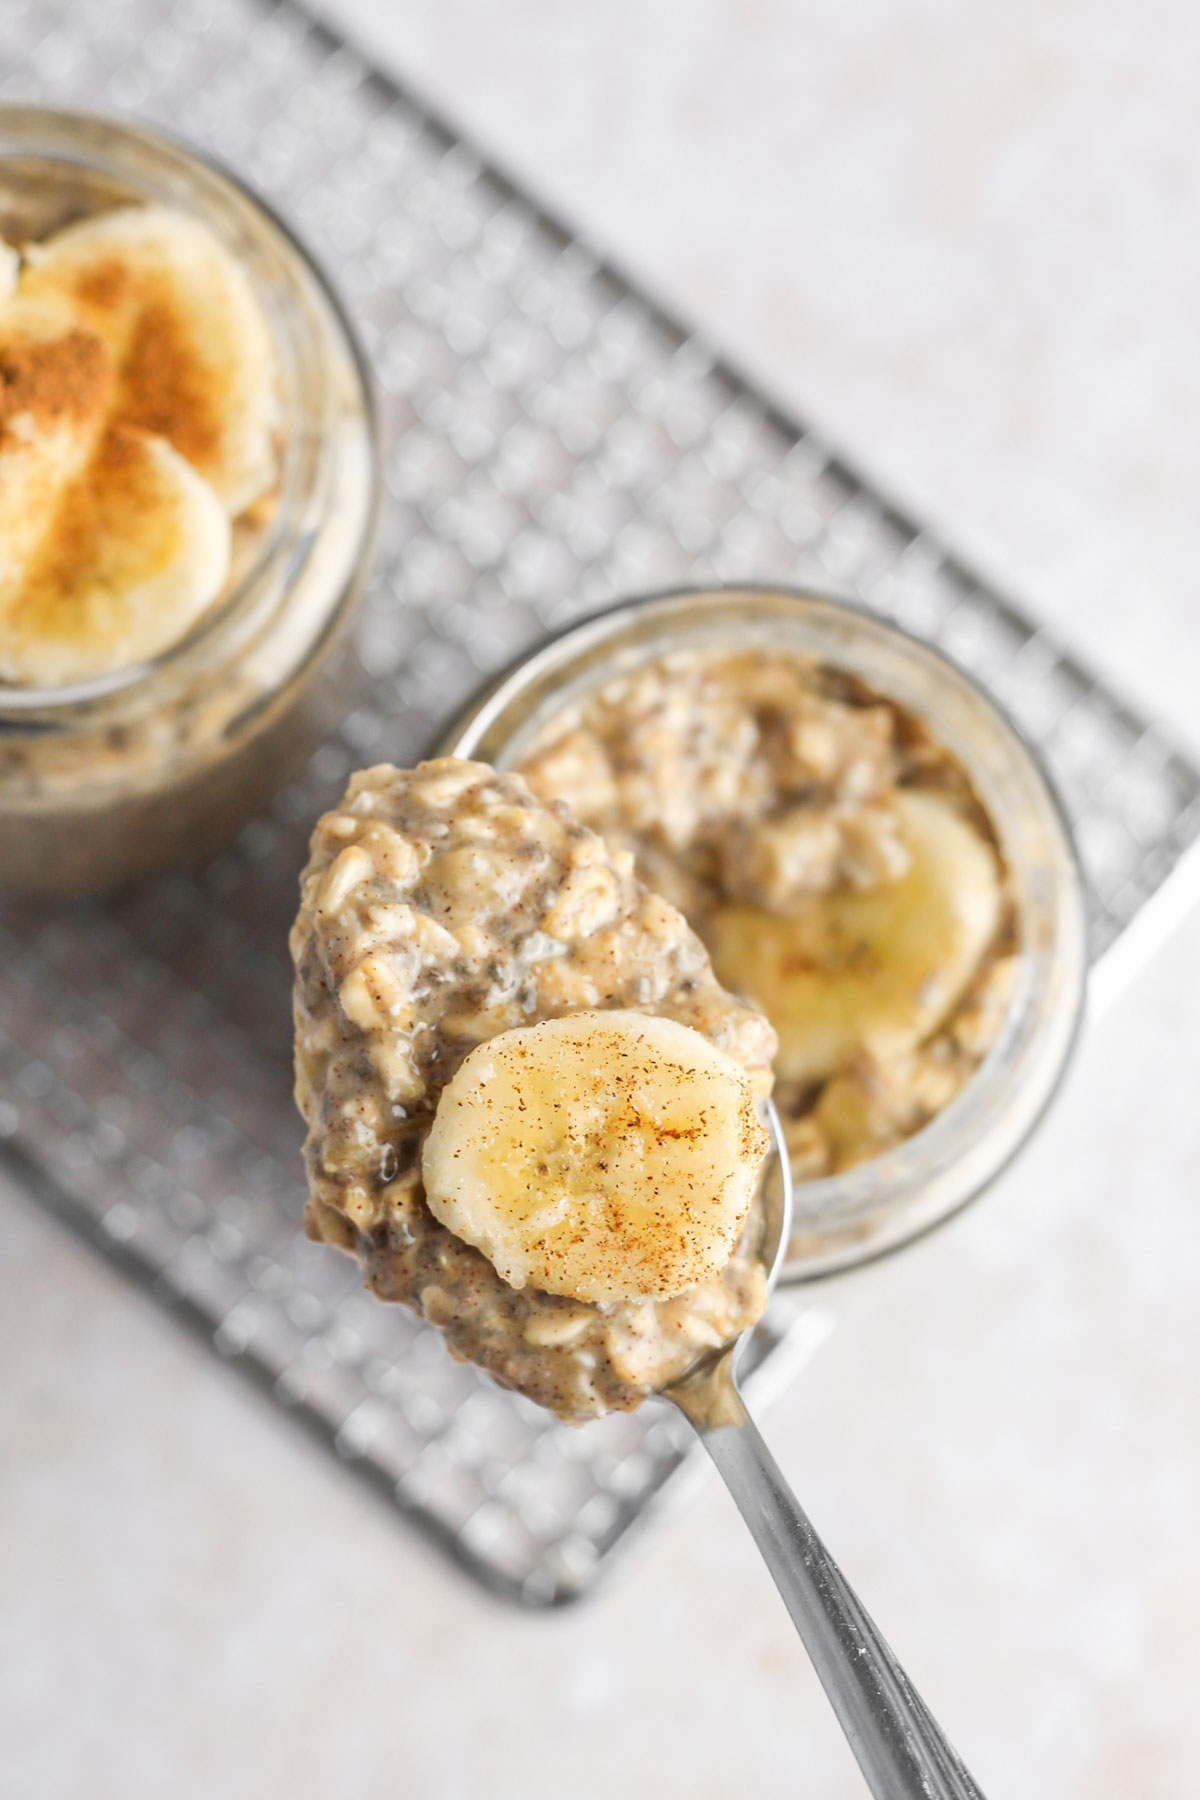 a spoonful of oatmeal with a fresh banana slice on the spoon, and a dash of cinnamon. The spoon is held above a jar of oats.